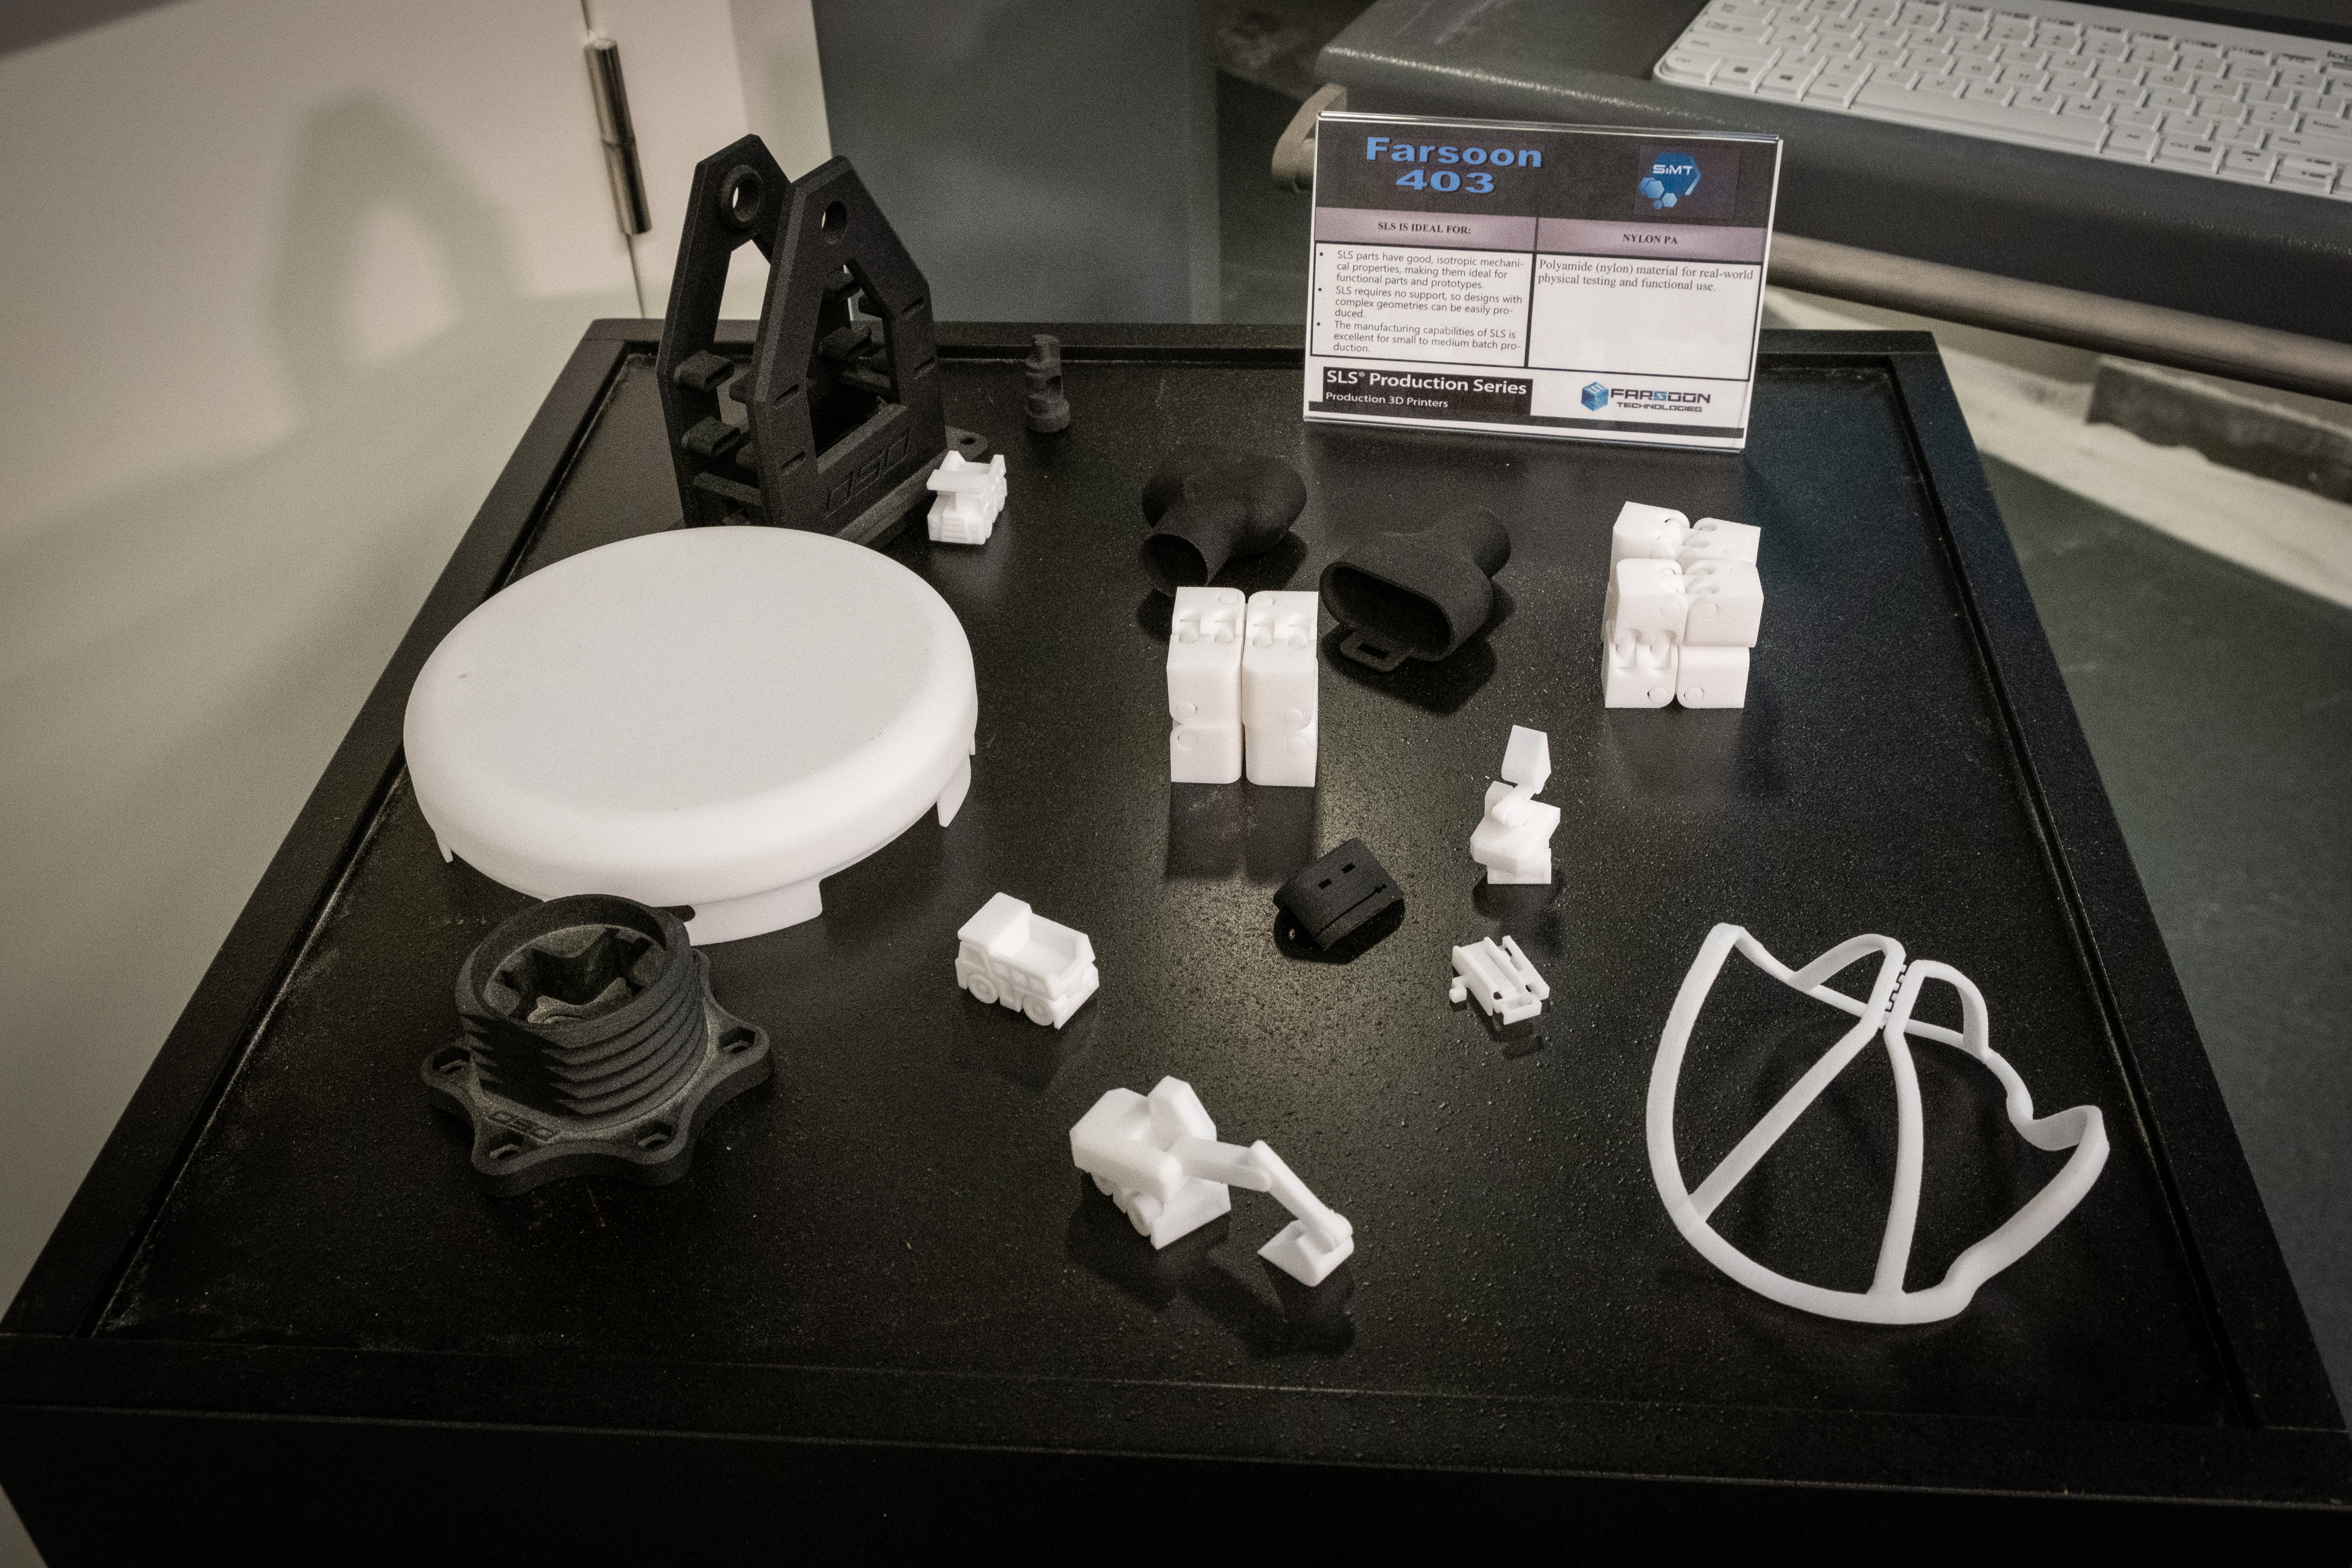 A sampling of 3D printed objects produced by the SiMT's Farsoon 403 printer.